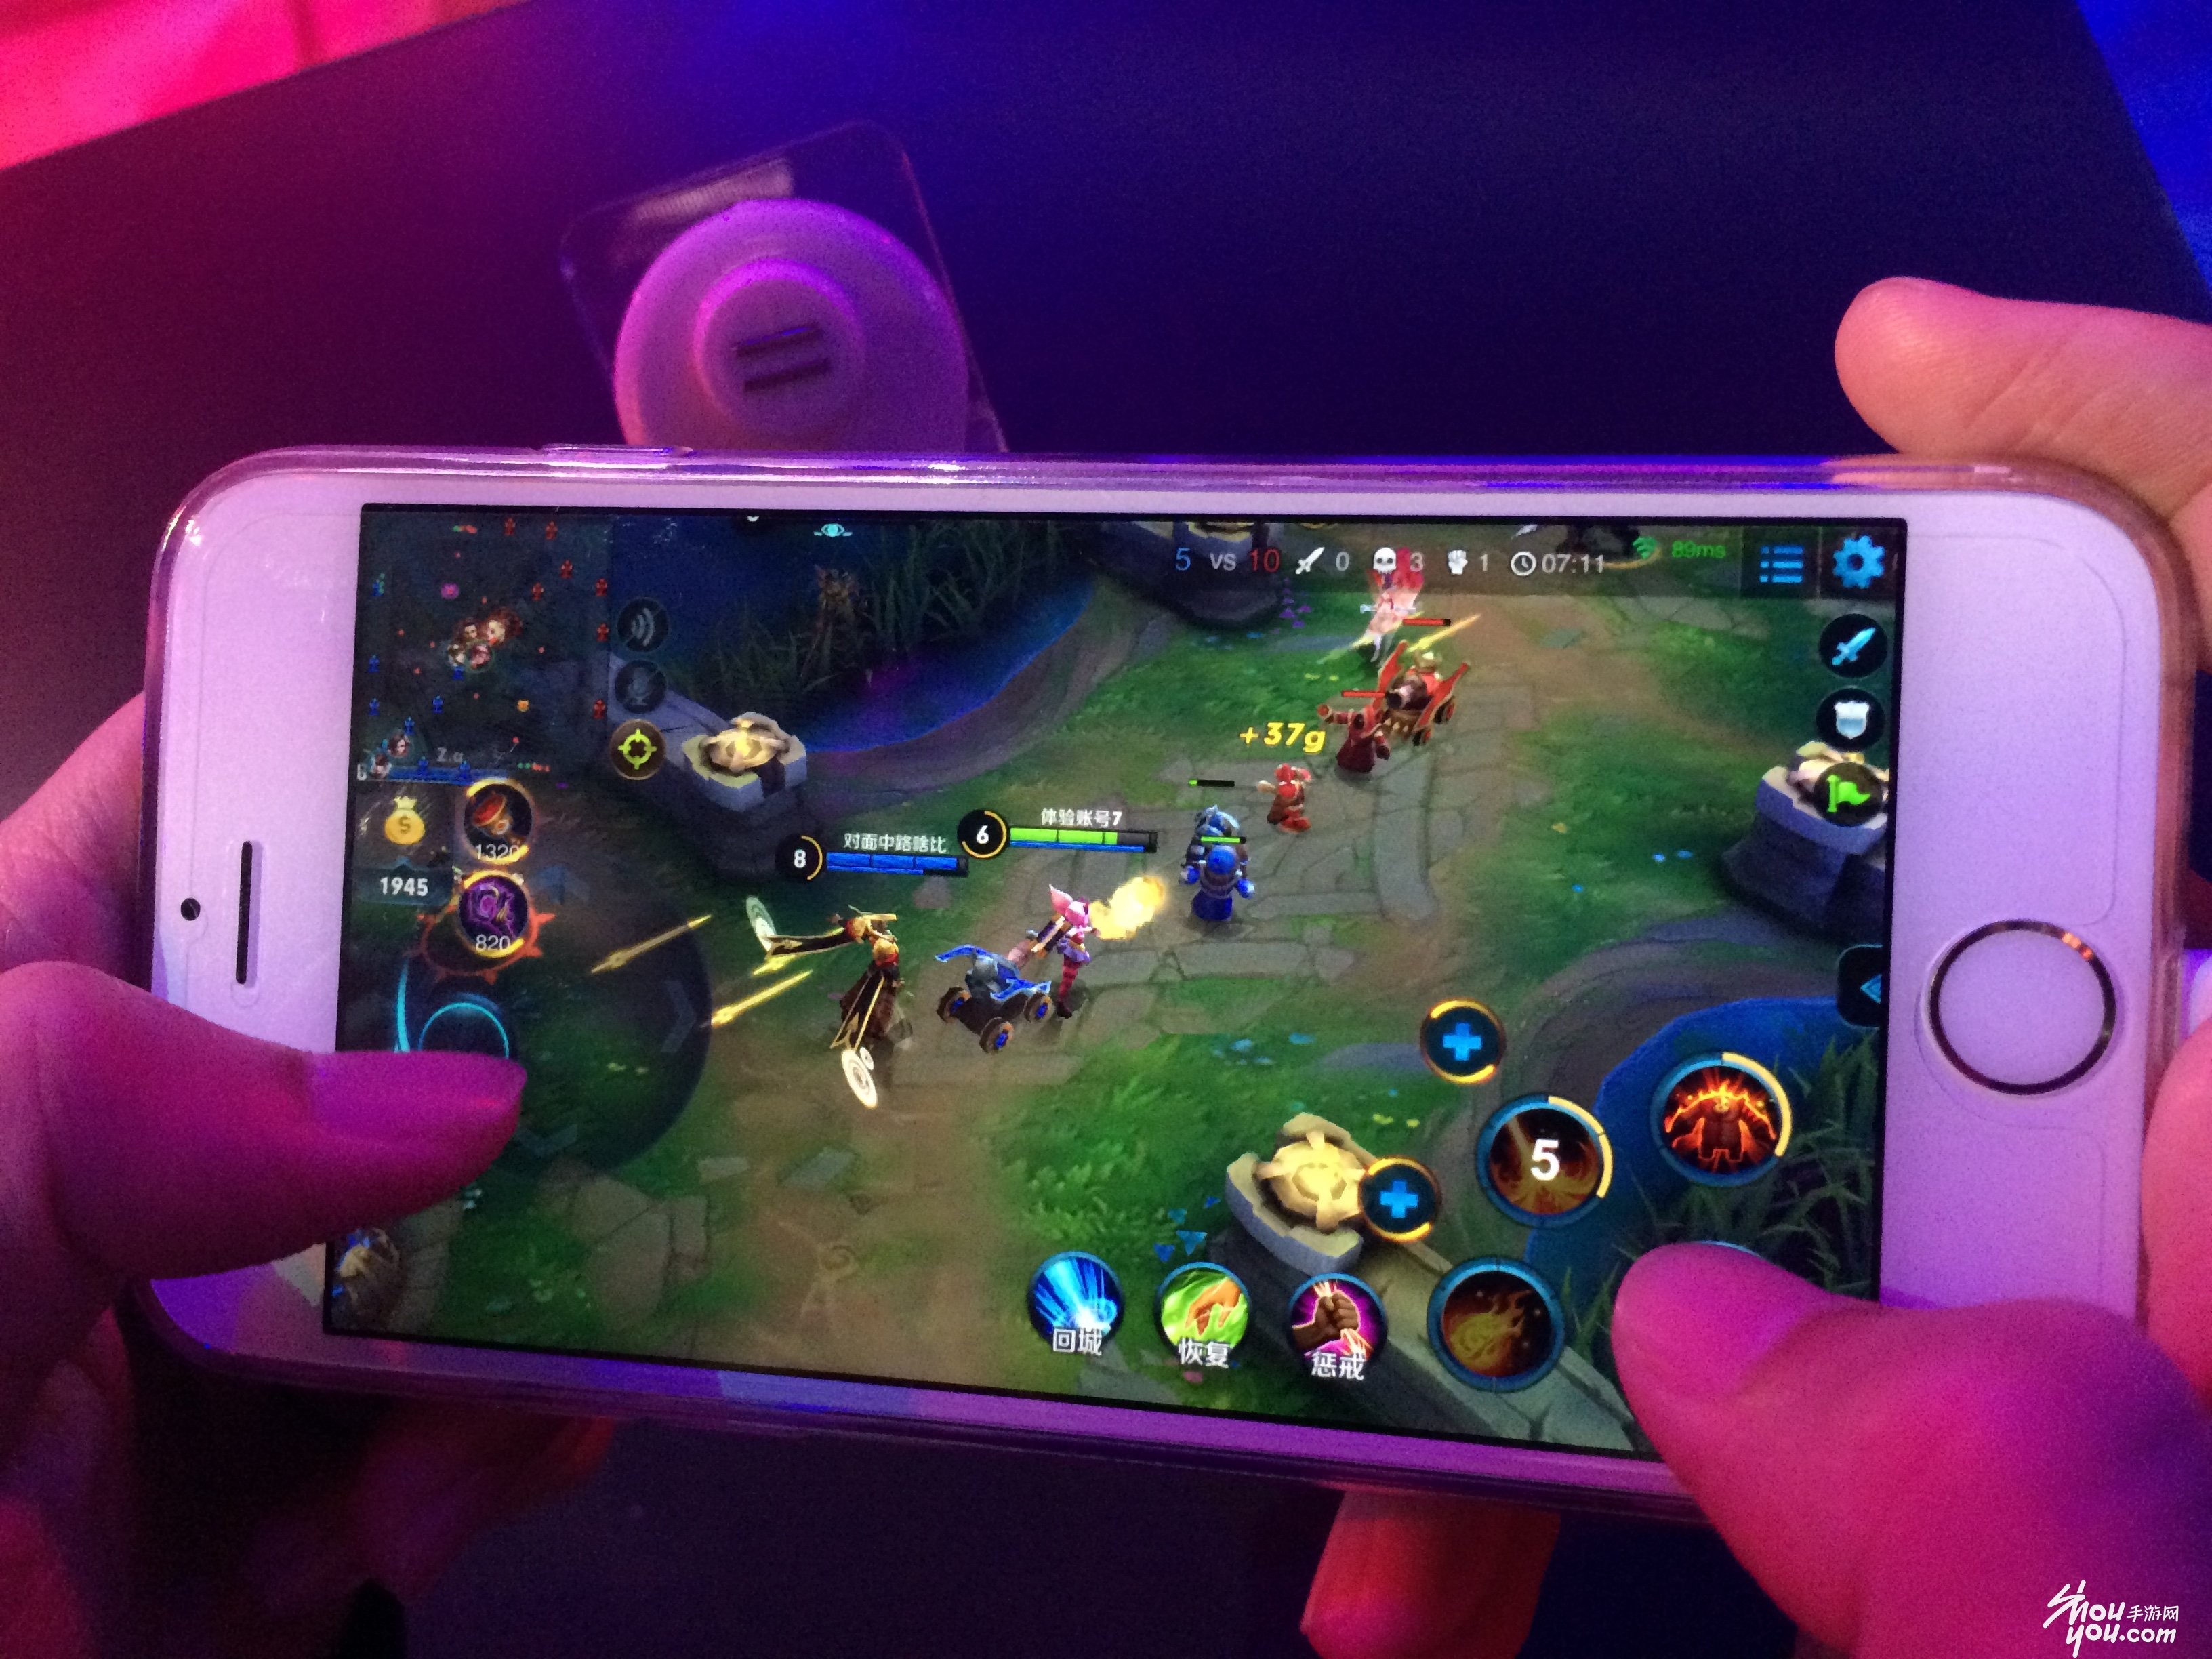 Honor of Kings,' the Red-Hot Mobile Game in China, Tries to Crack